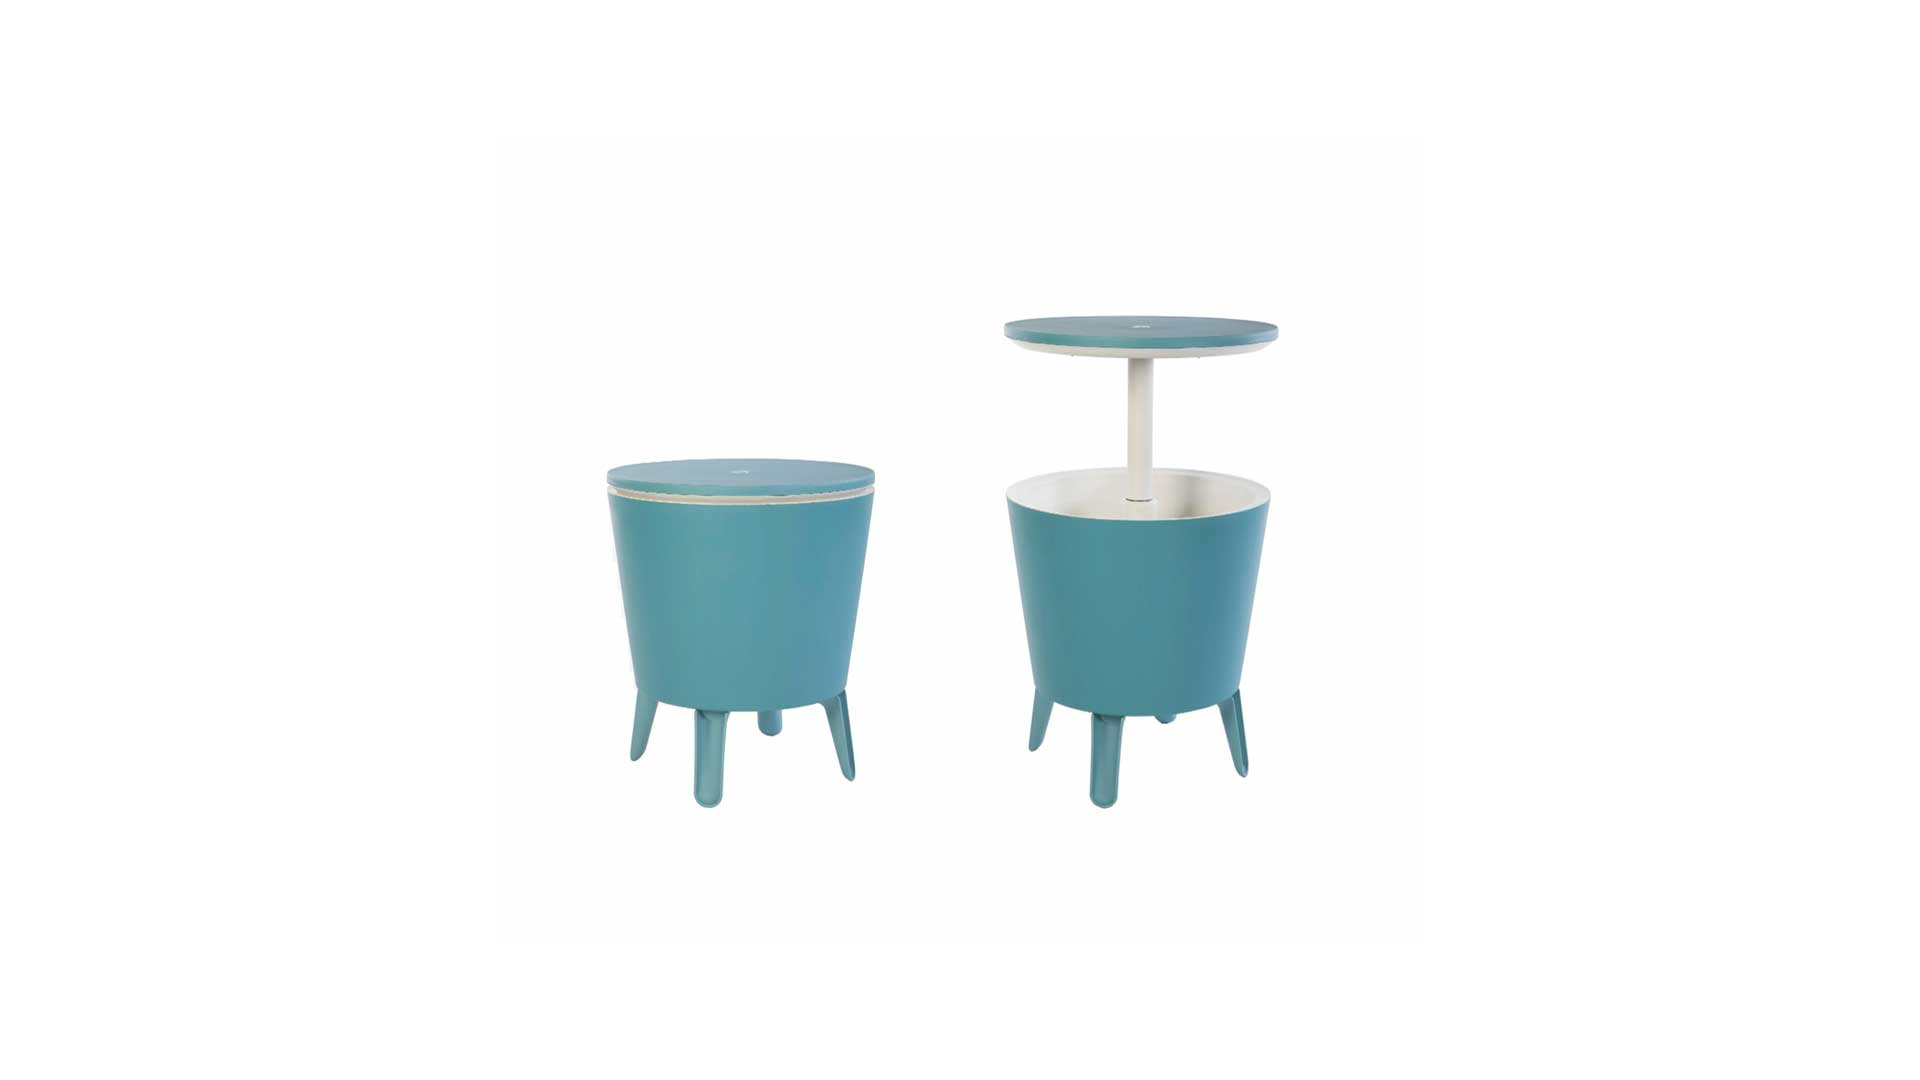 Teal Resin Outdoor Accent Table and Cooler in One